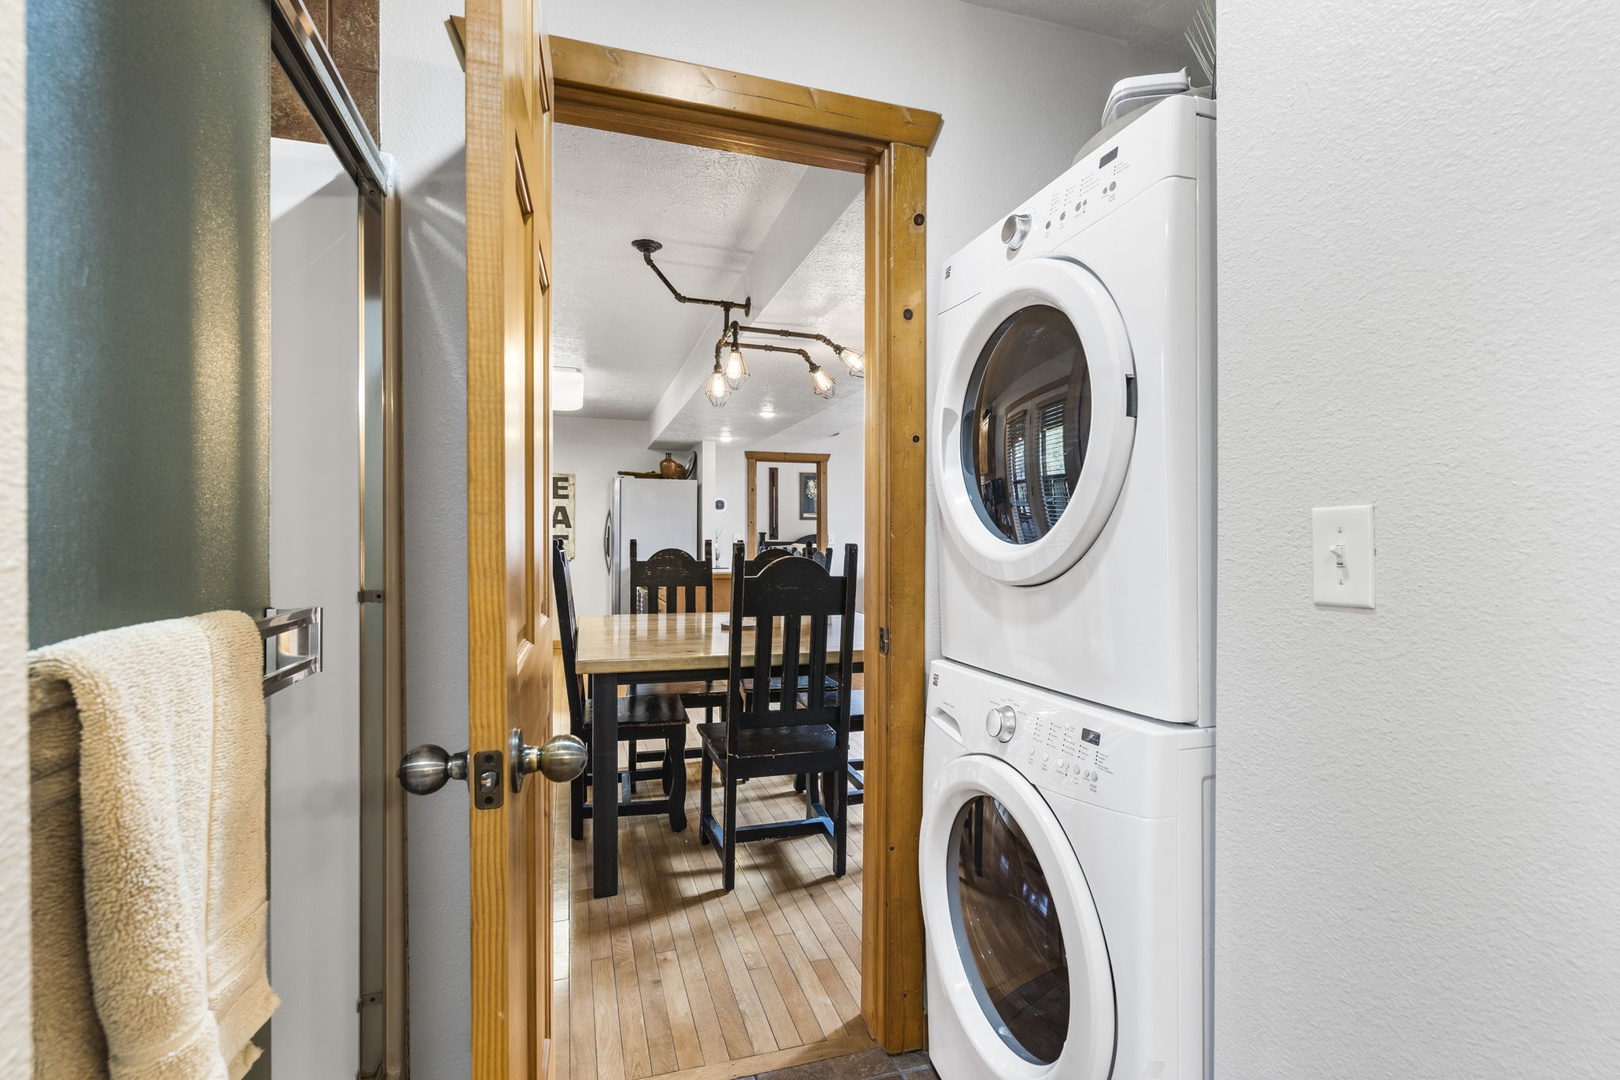 Private Laundry is available for your stay, located in the First Floor Full Bathroom